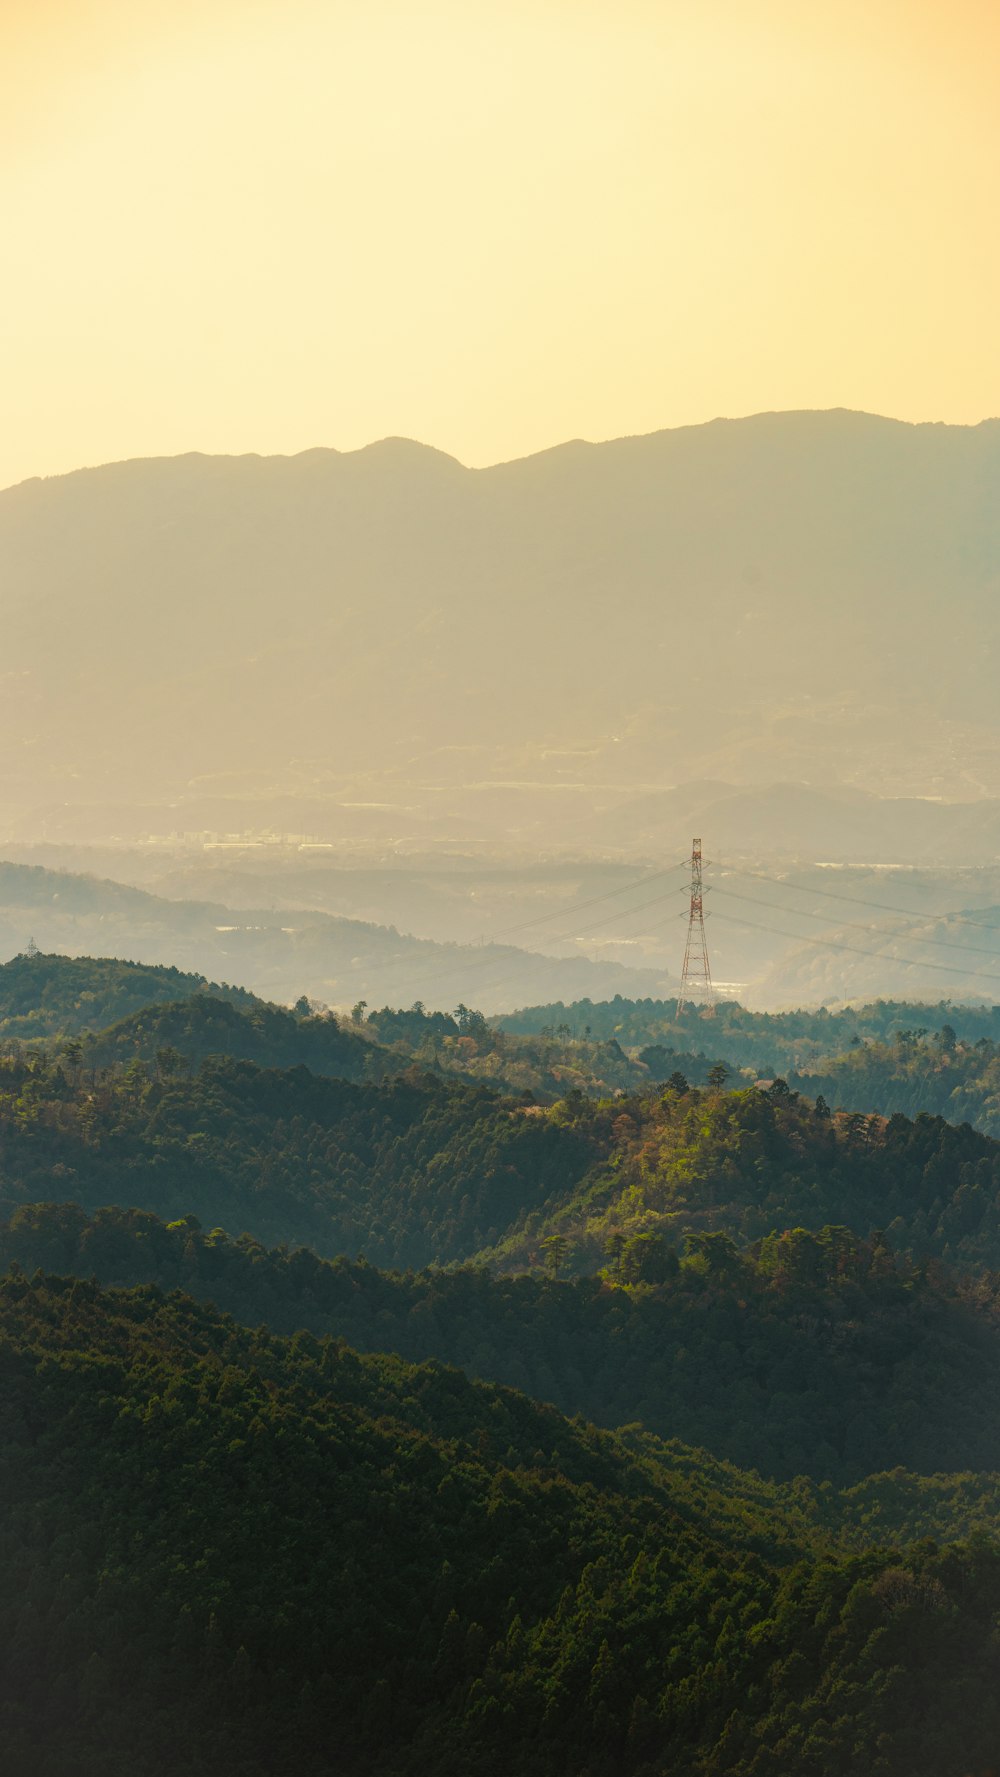 a view of a mountain range with a radio tower in the distance